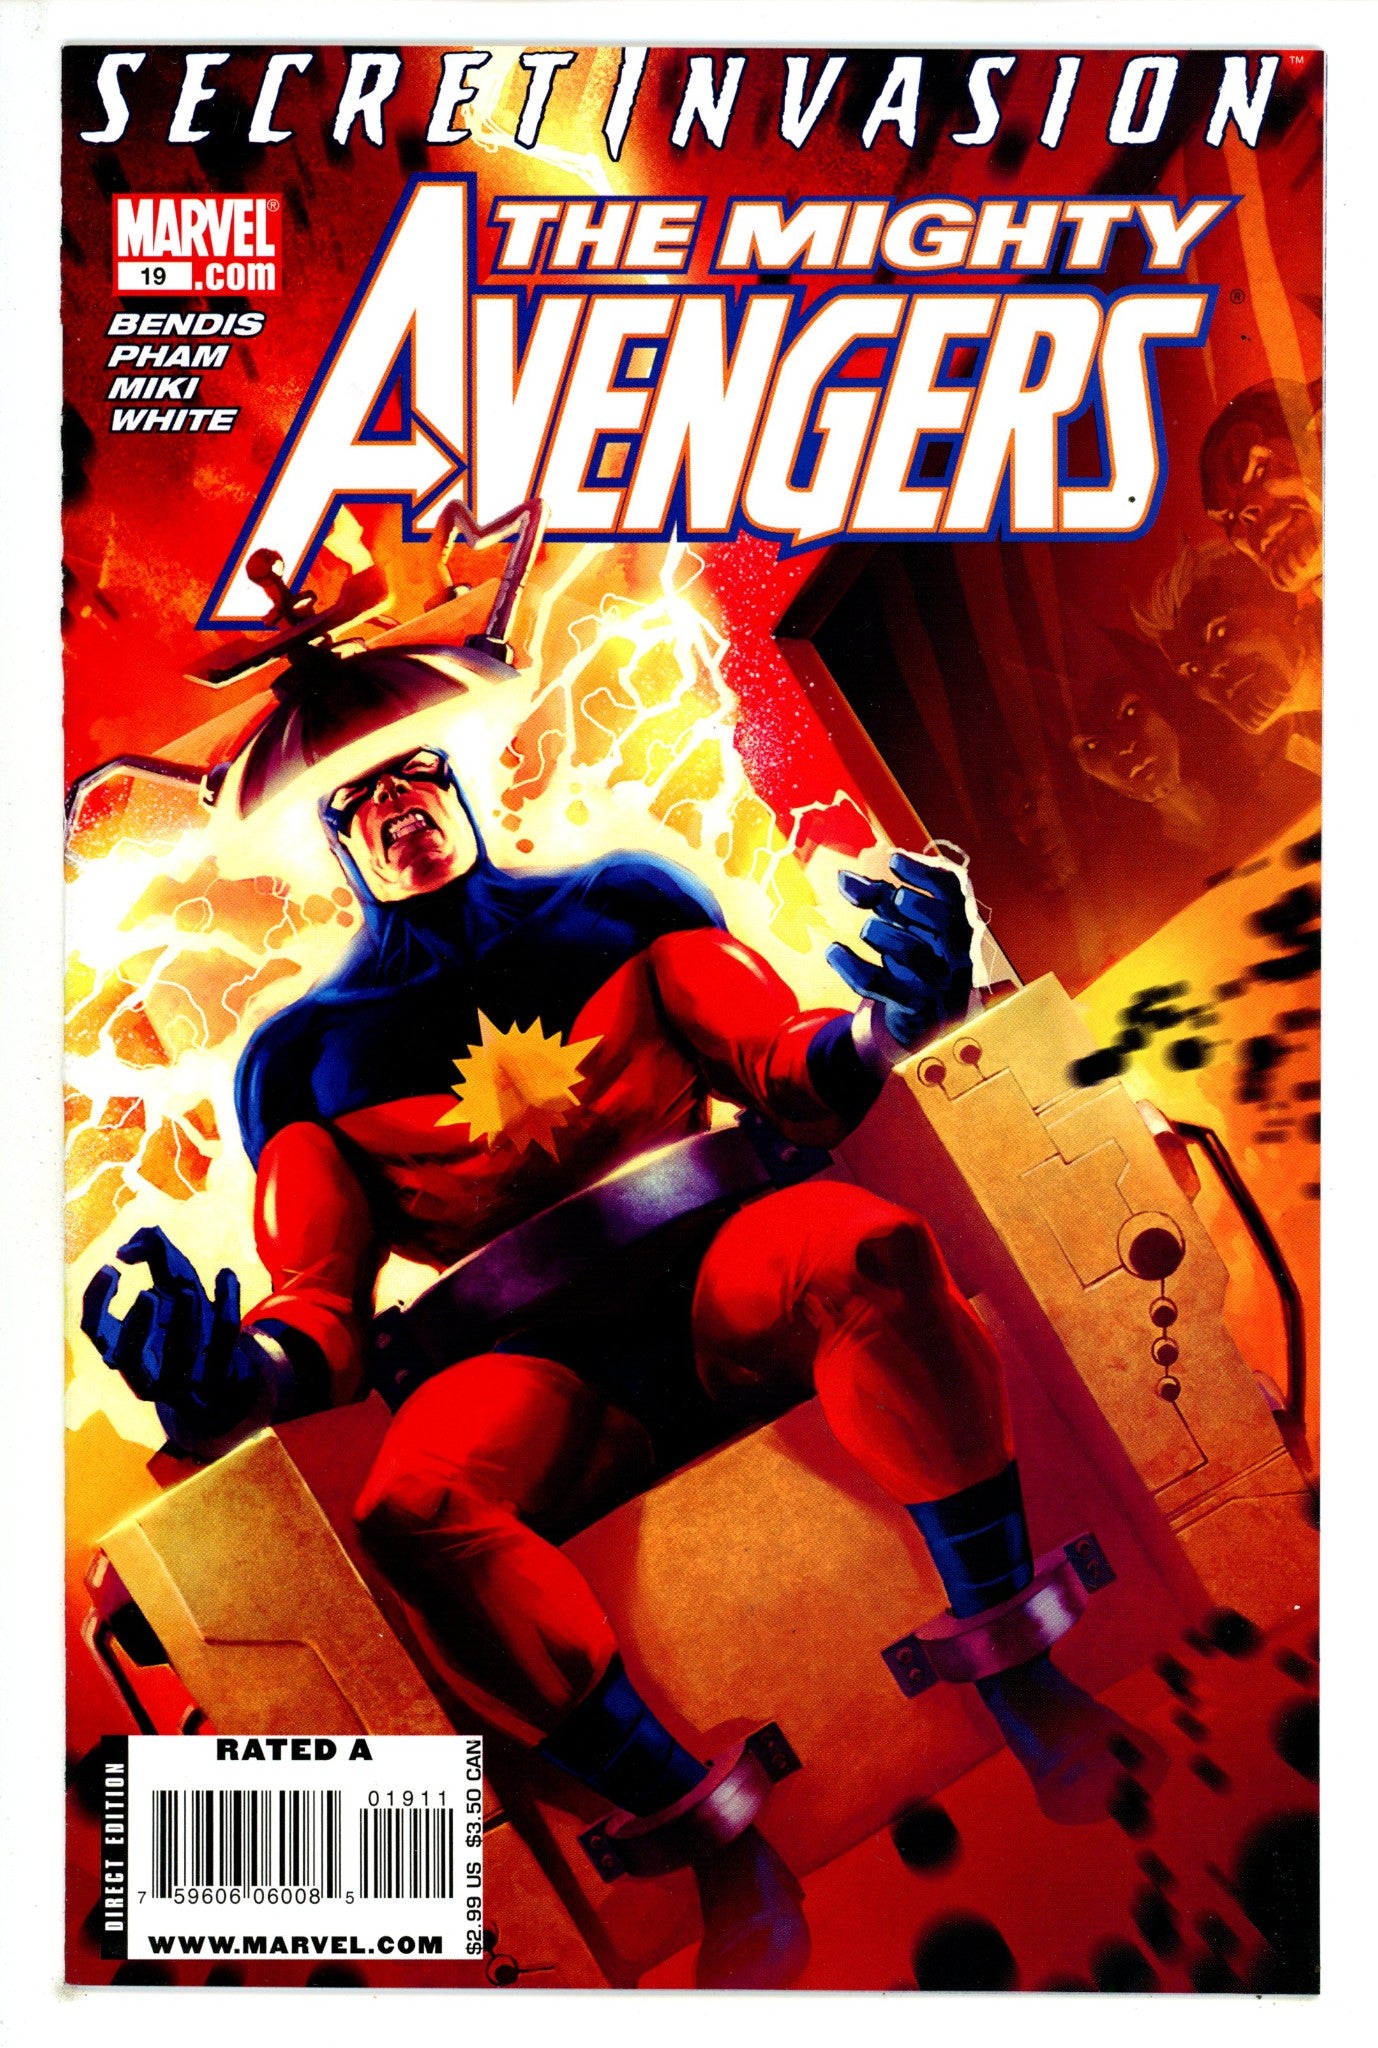 The Mighty Avengers Vol 1 19 High Grade (2008) 